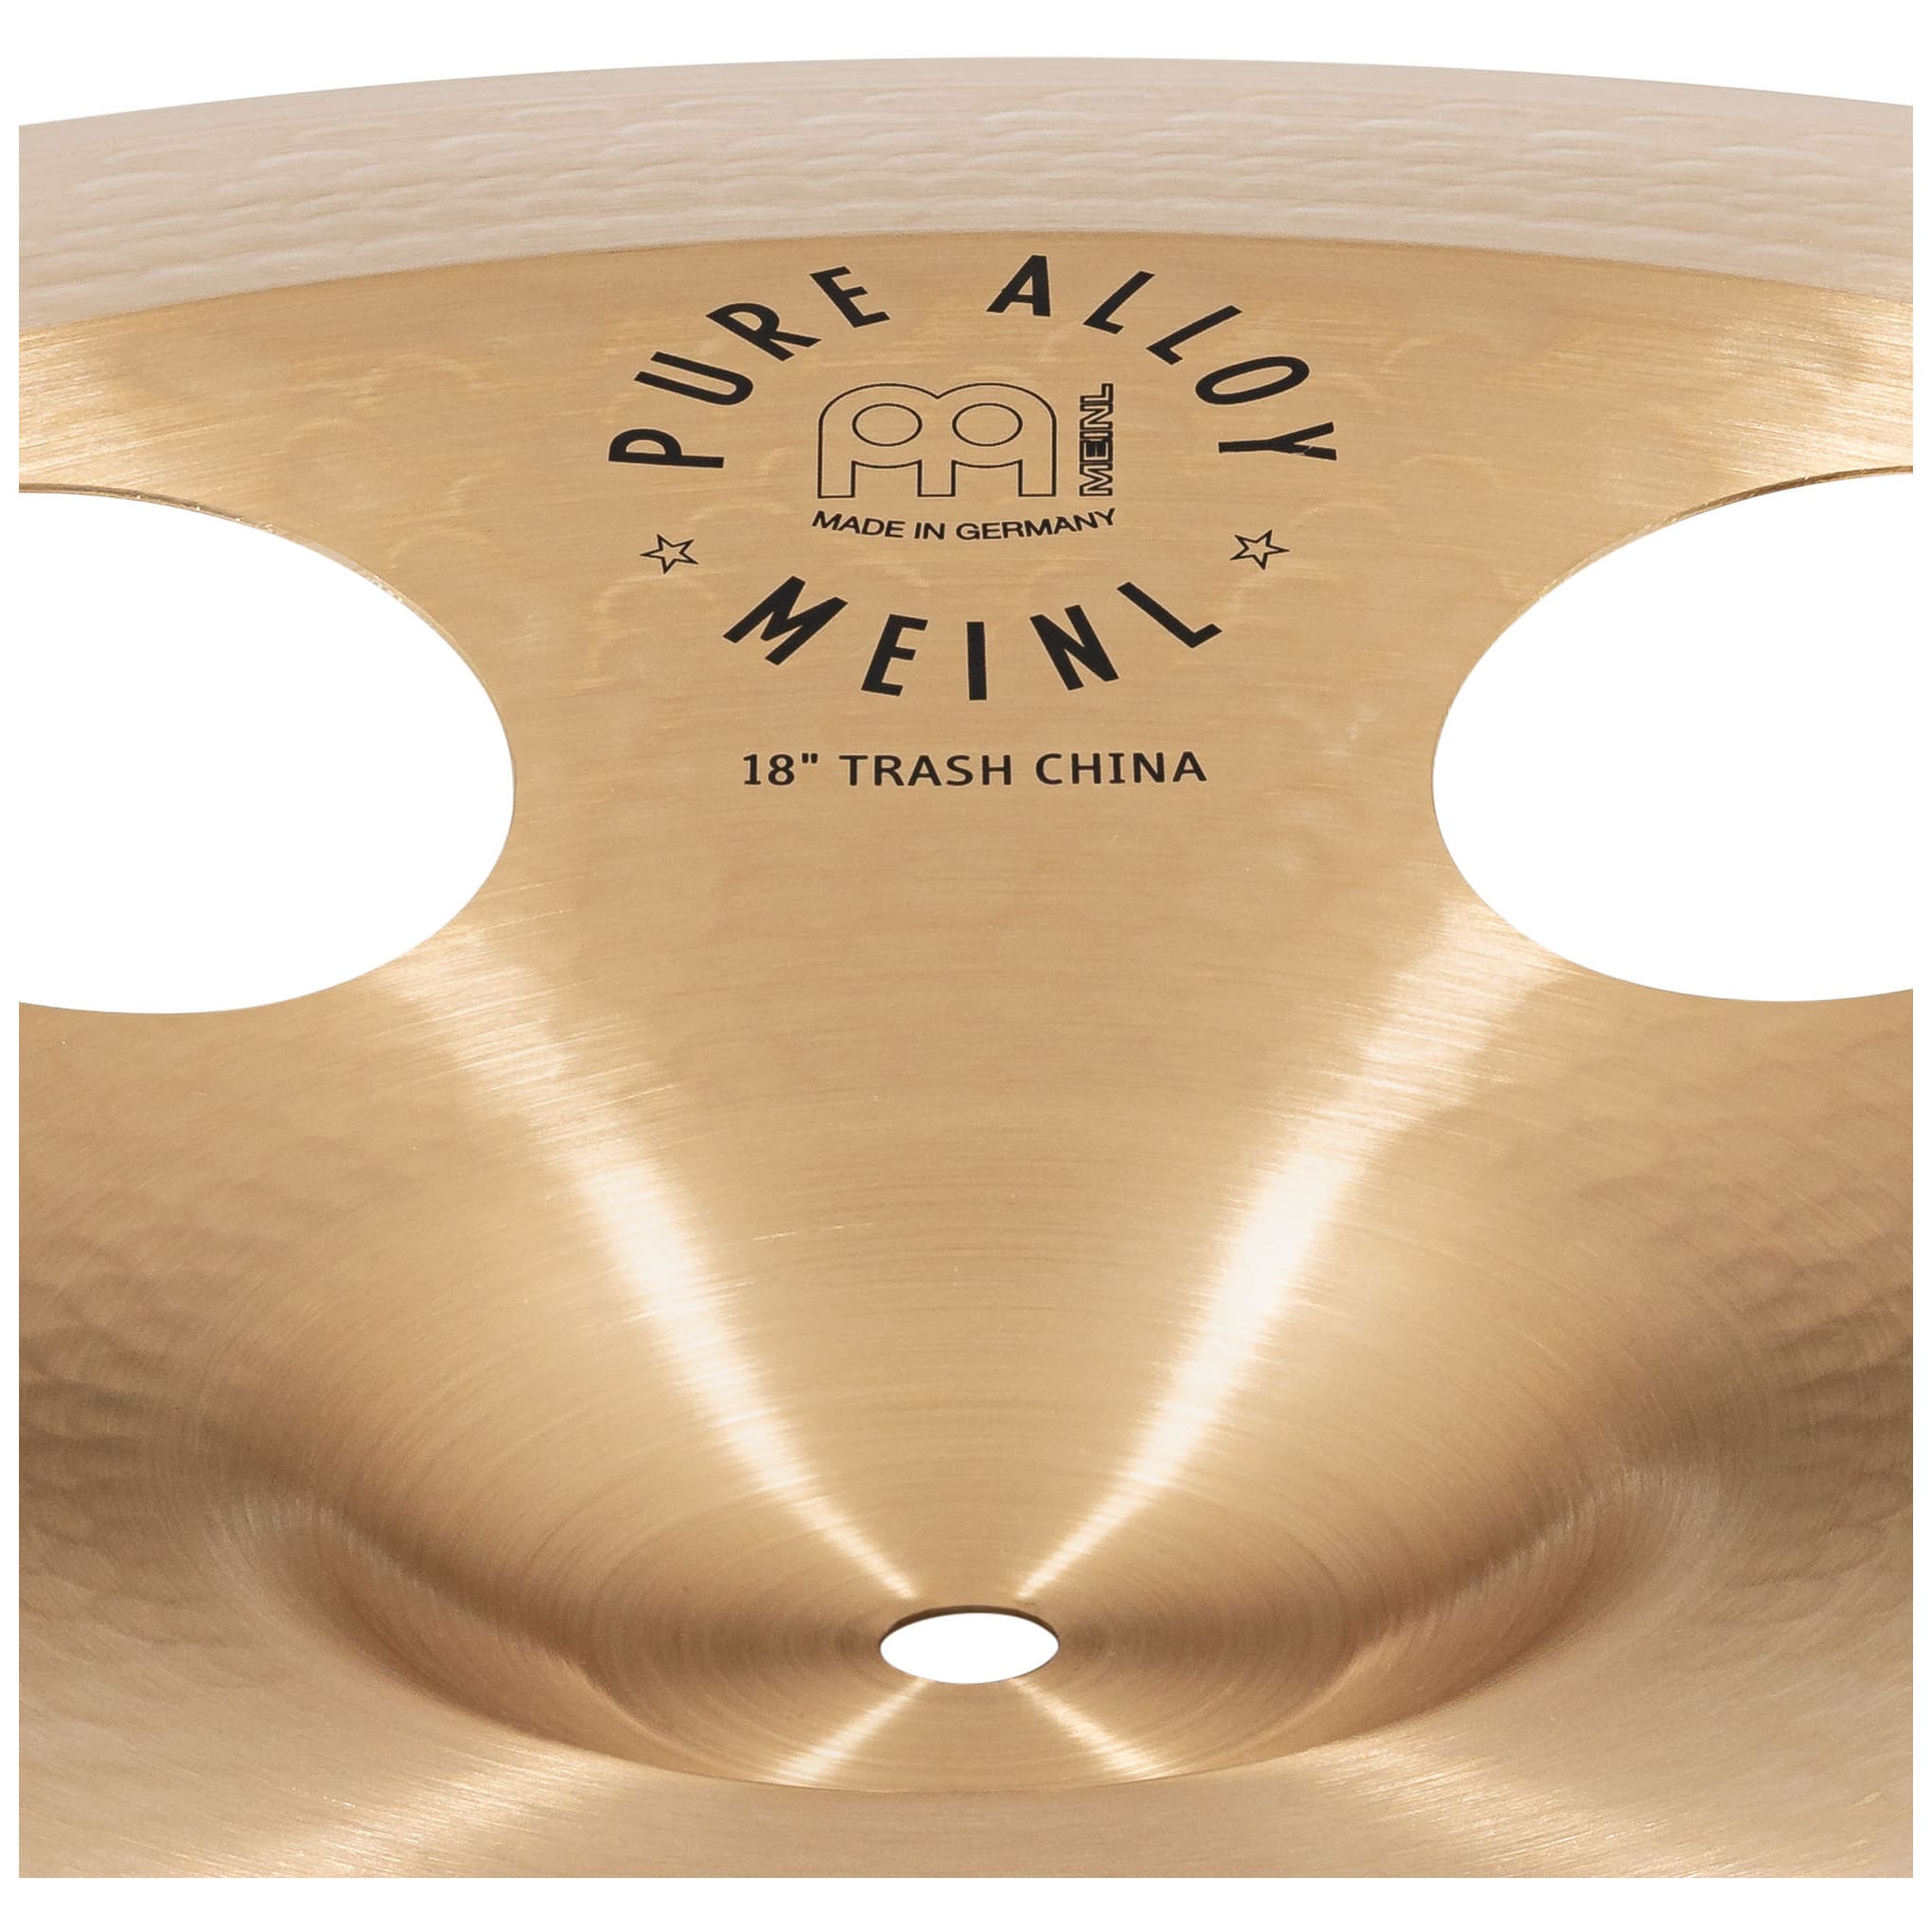 Meinl Cymbals PA18TRCH - 18" Pure Alloy Trash China 8